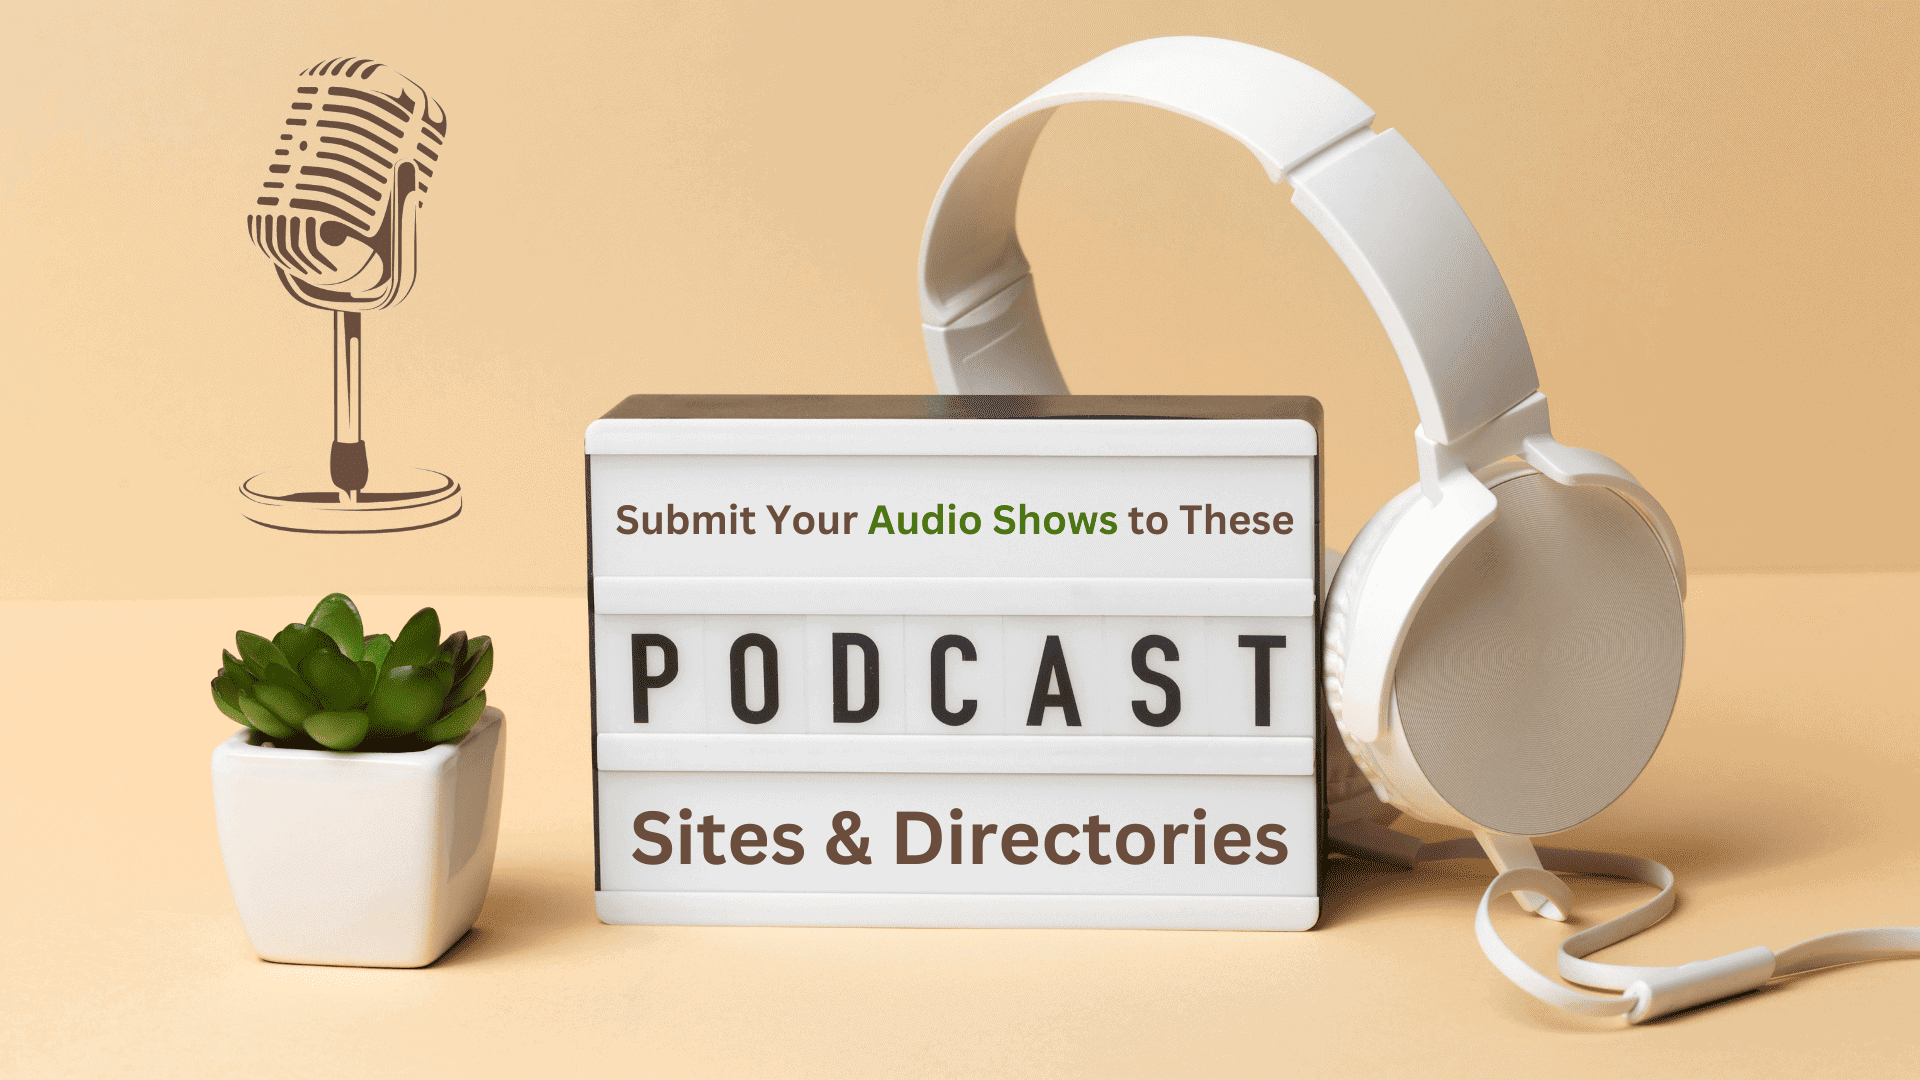 Podcast Submission Sites to Submit Audio Shows